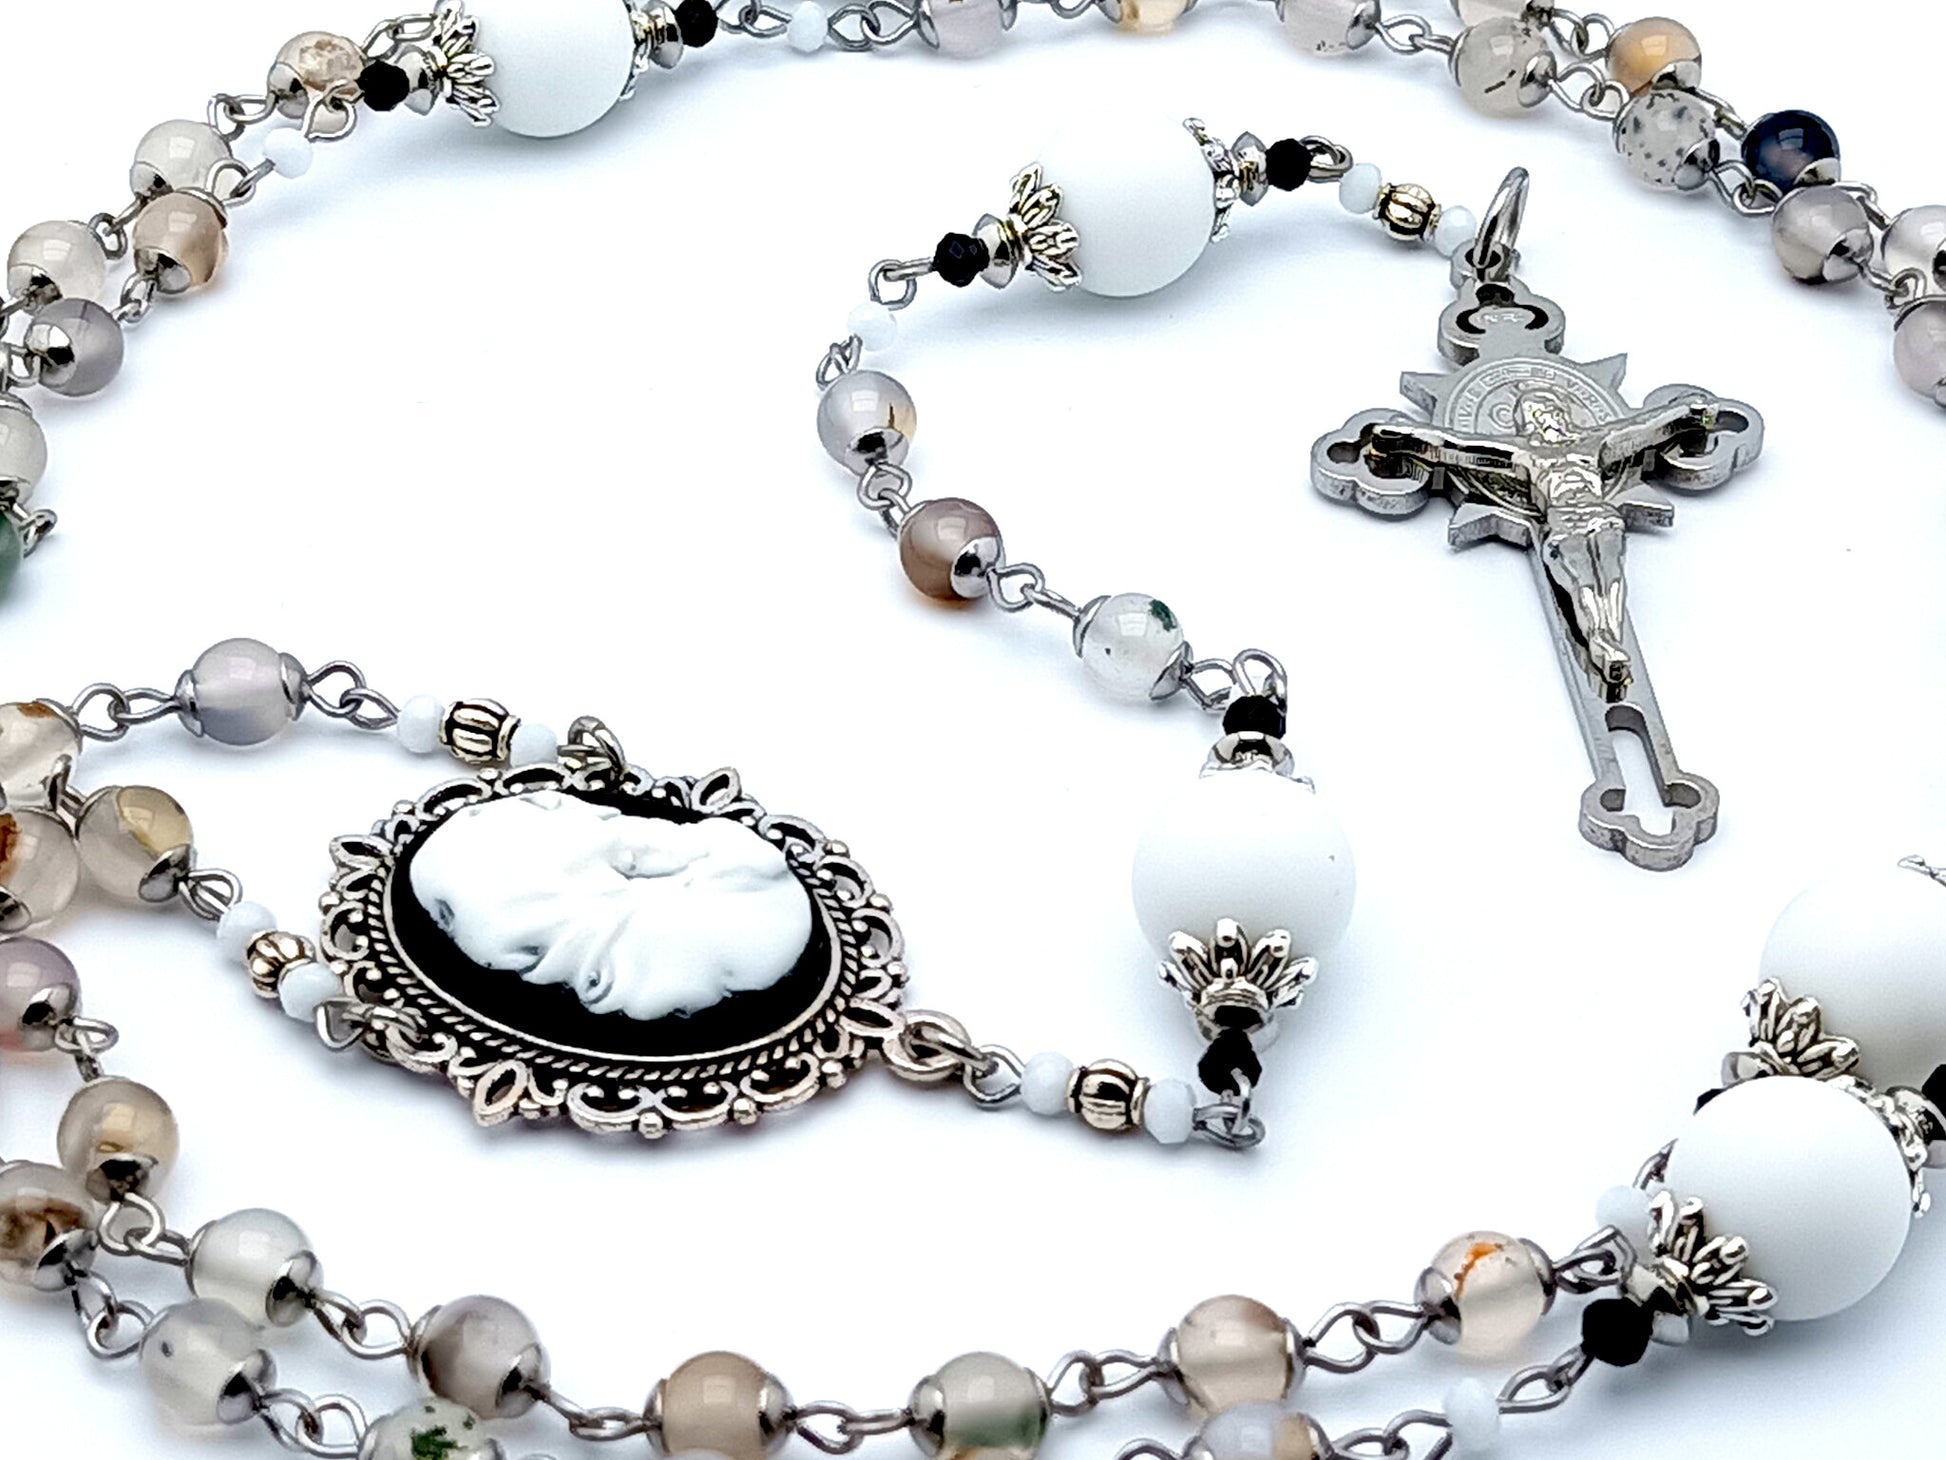 Virgin and child Jesus cameo unique rosary beads with agate and alabaster gemstone beads and engraved stainless steel Saint Benedict crucifix.